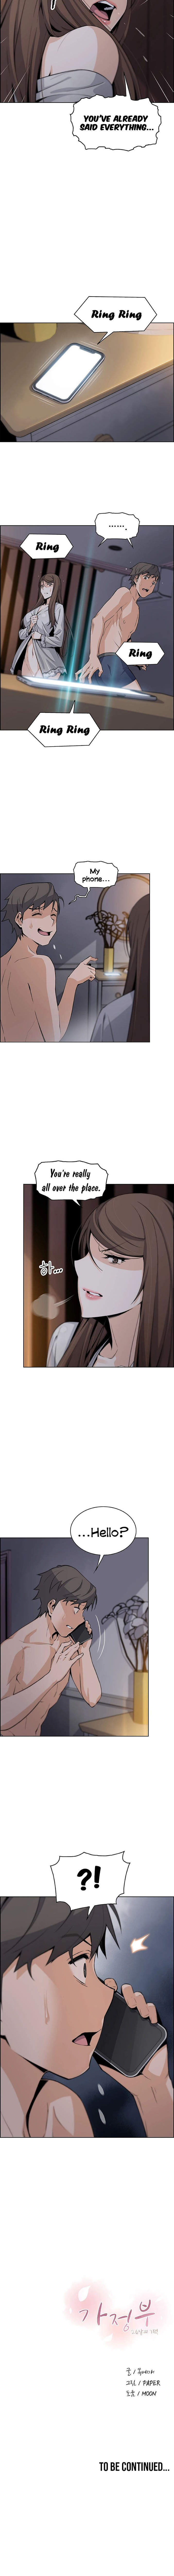 Housekeeper Manhwa - Chapter 44 Page 7